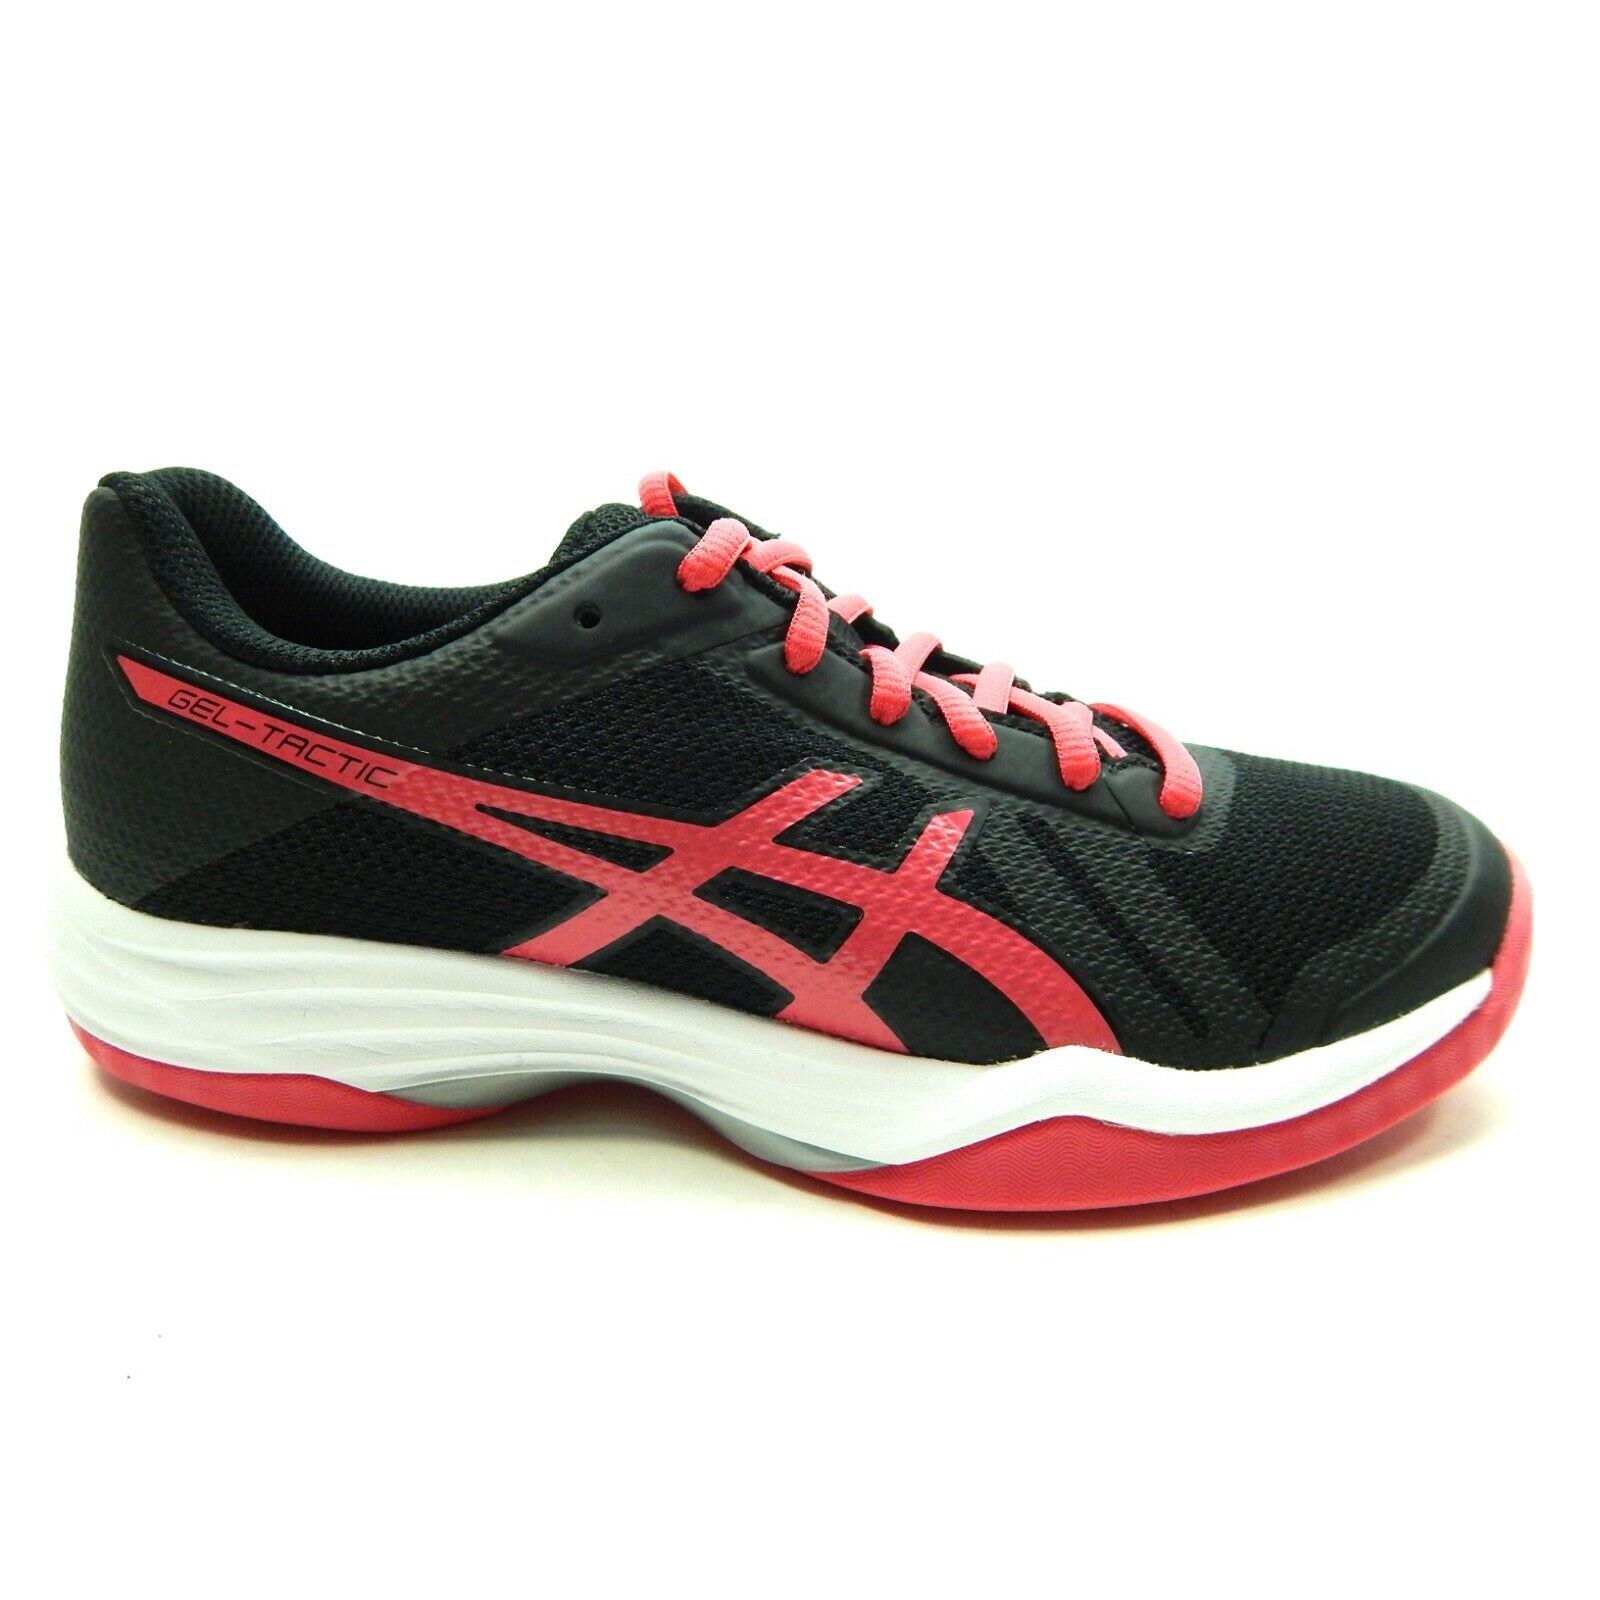 Asics Gel Tactic Black Pixel Pink Women Volleyball Shoes